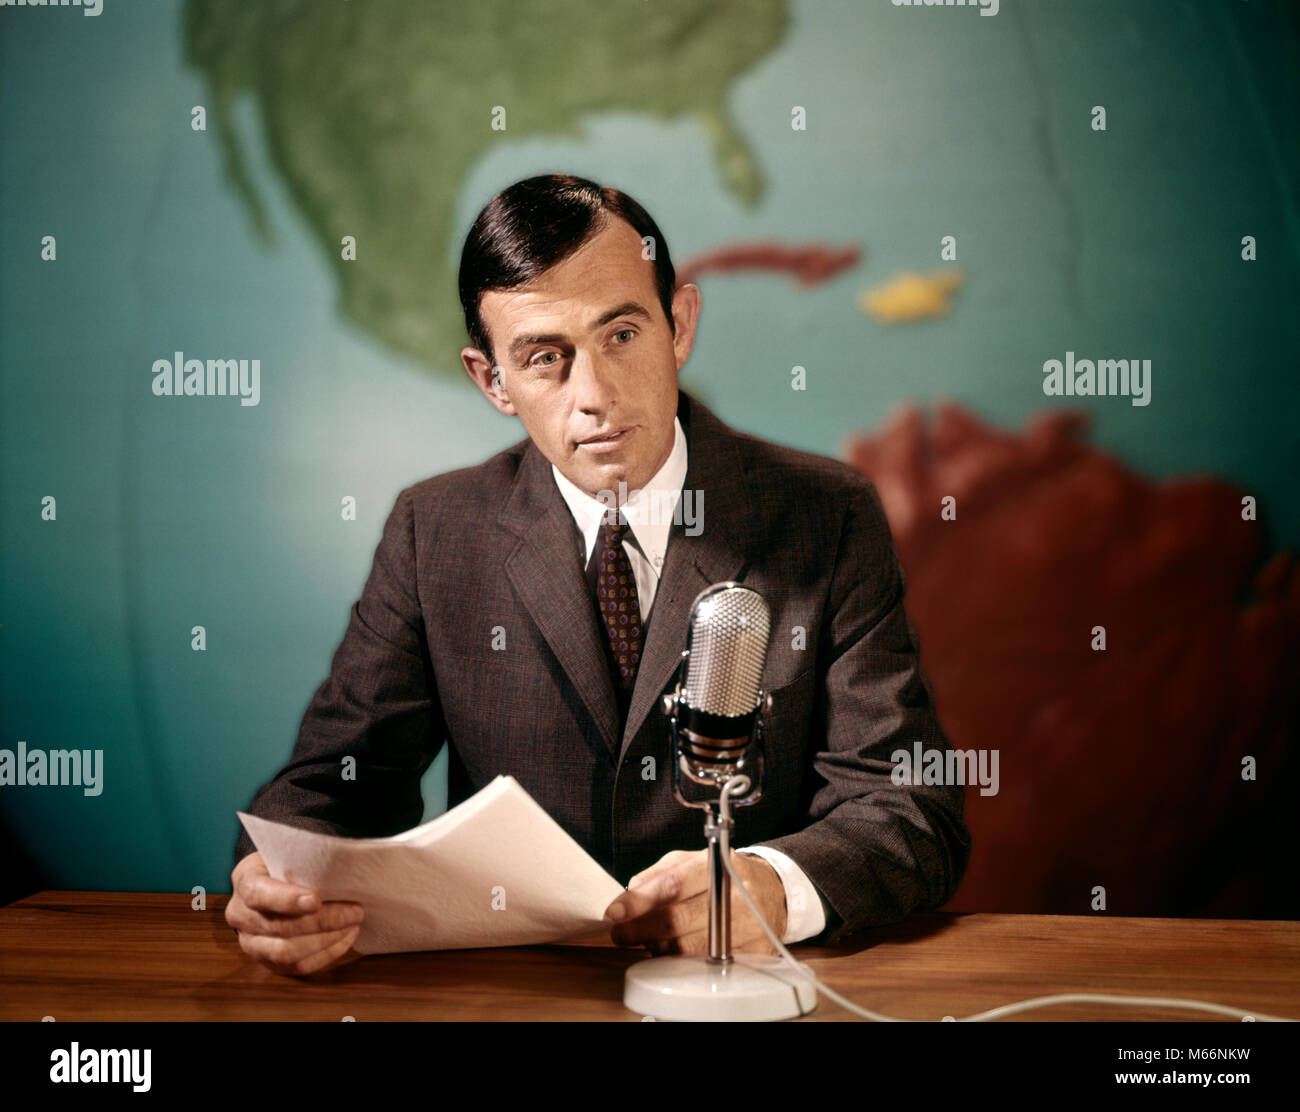 1960s NEWSMAN NEWS ANCHOR READING NEWS FROM PAPERS SPEAKING INTO MICROPHONE LOOKING AT CAMERA - kt7200 HAR001 HARS CAREER TEAMWORK INFORMATION CAUCASIAN ANCHOR LIFESTYLE SPEED JOBS STUDIO SHOT ONE PERSON ONLY COMMUNICATING HALF-LENGTH INSPIRATION SPEAK INDOORS PROFESSION ENTERTAINMENT CONFIDENCE NOSTALGIA 25-30 YEARS 30-35 YEARS FREEDOM SKILL OCCUPATION SKILLS CAREERS KNOWLEDGE PRIDE AUTHORITY COMMUNICATE IDEAS COMMUNICATIONS MALES MID-ADULT MID-ADULT MAN NEWSMAN PRECISION CAUCASIAN ETHNICITY COMMENT COMMENTATOR COMMENTS LOOKING AT CAMERA OCCUPATIONS OLD FASHIONED PERSONS Stock Photo